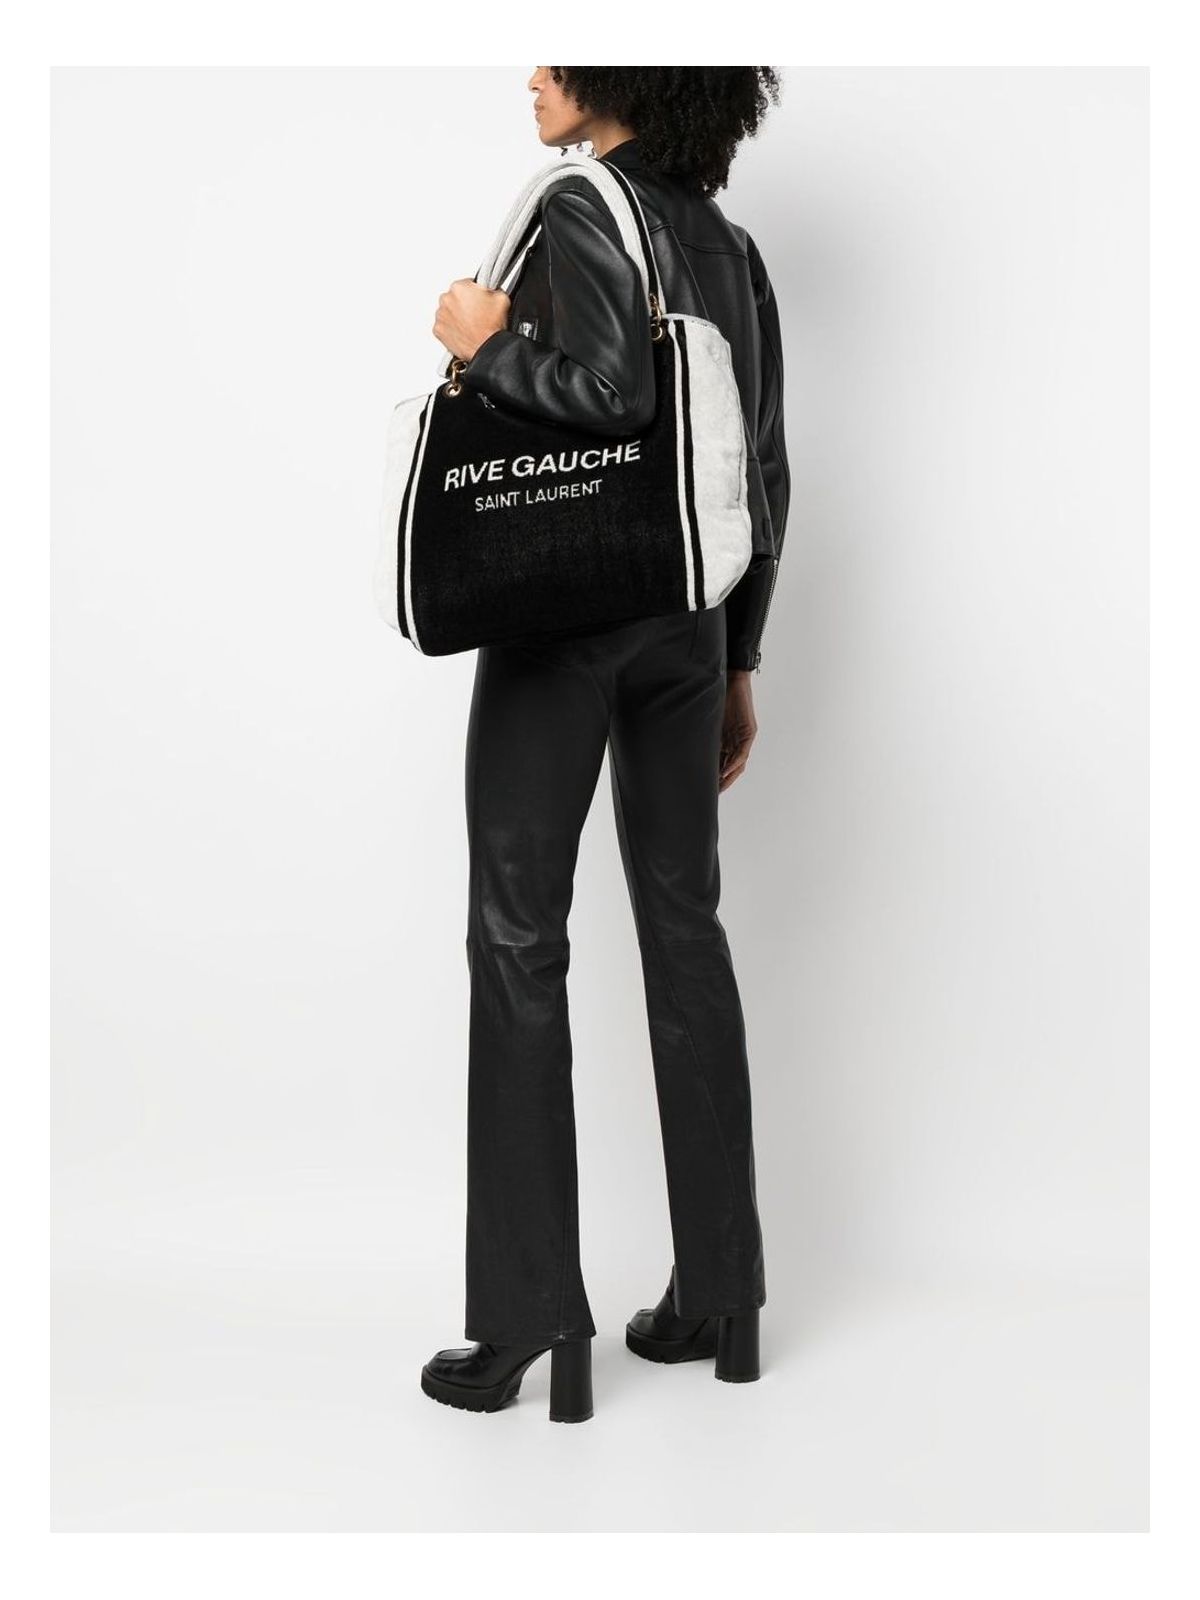 1070 SAINT LAURENT  RIVE GAUCHE TOTE IN BLACK AND WHITE TERRY CLOTH